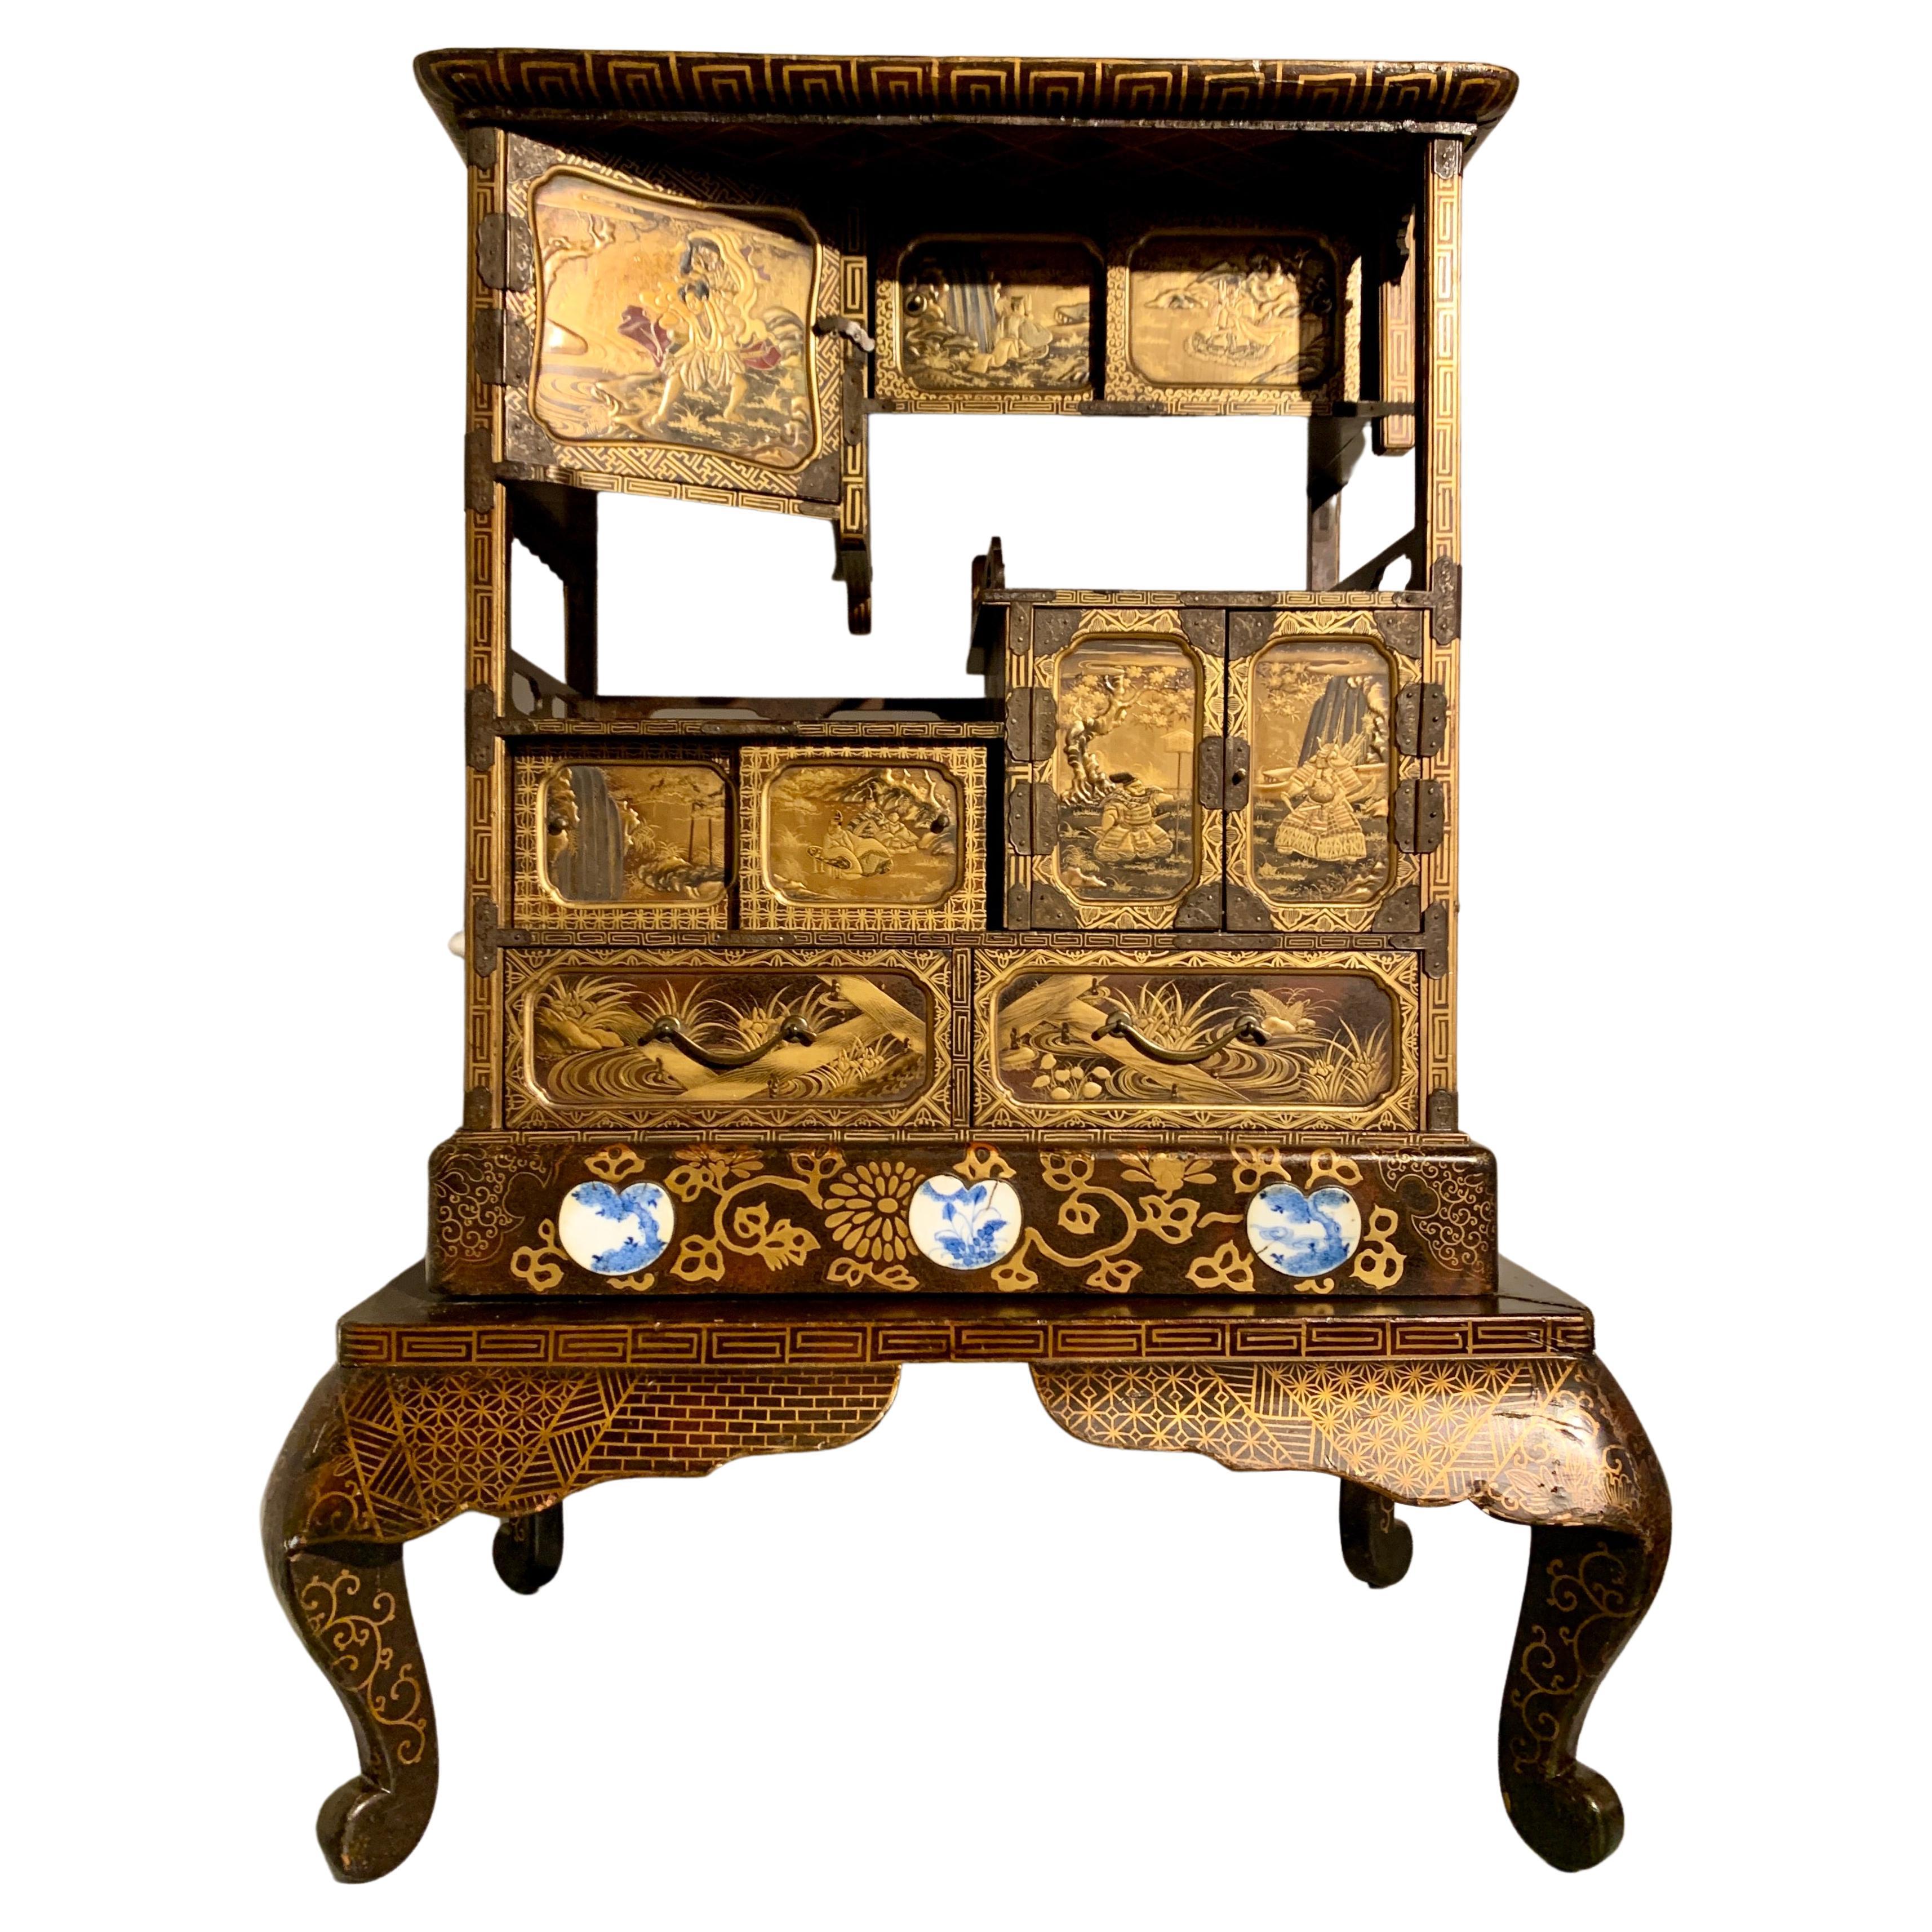 Japanese Lacquer Display Cabinet on Stand, Meiji Period, 19th Century, Japan For Sale